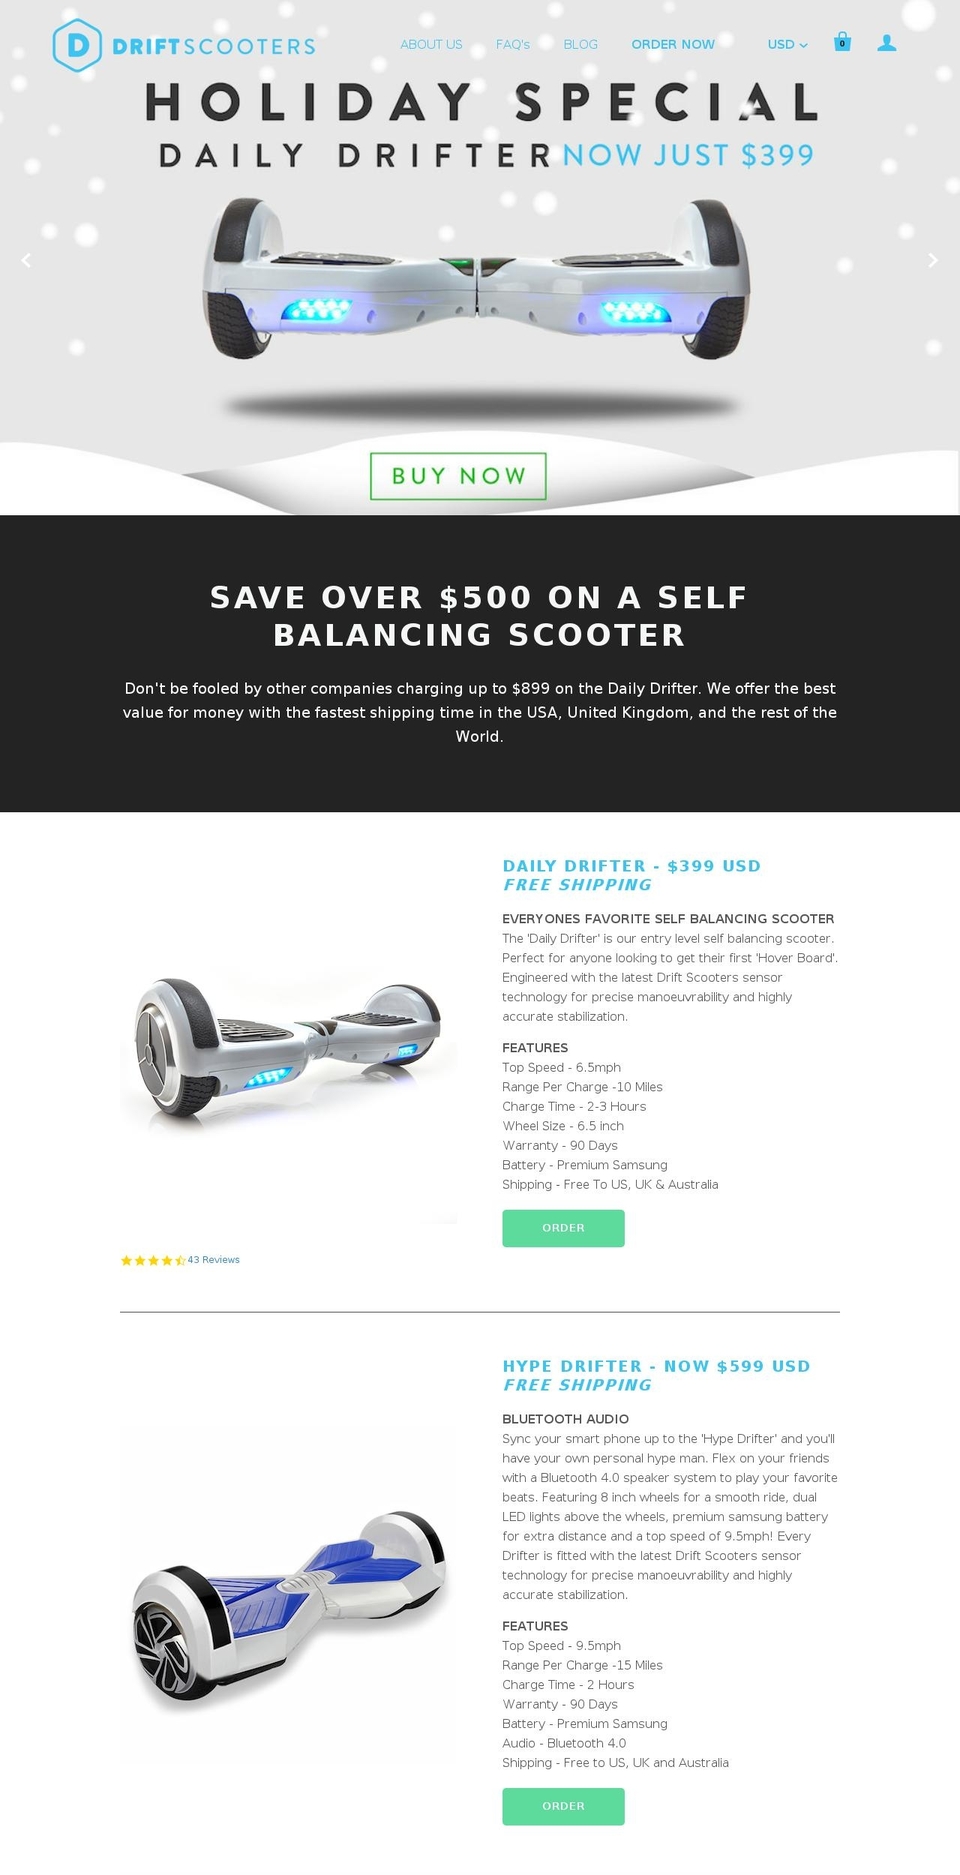 Startup Shopify theme site example driftscooters.com